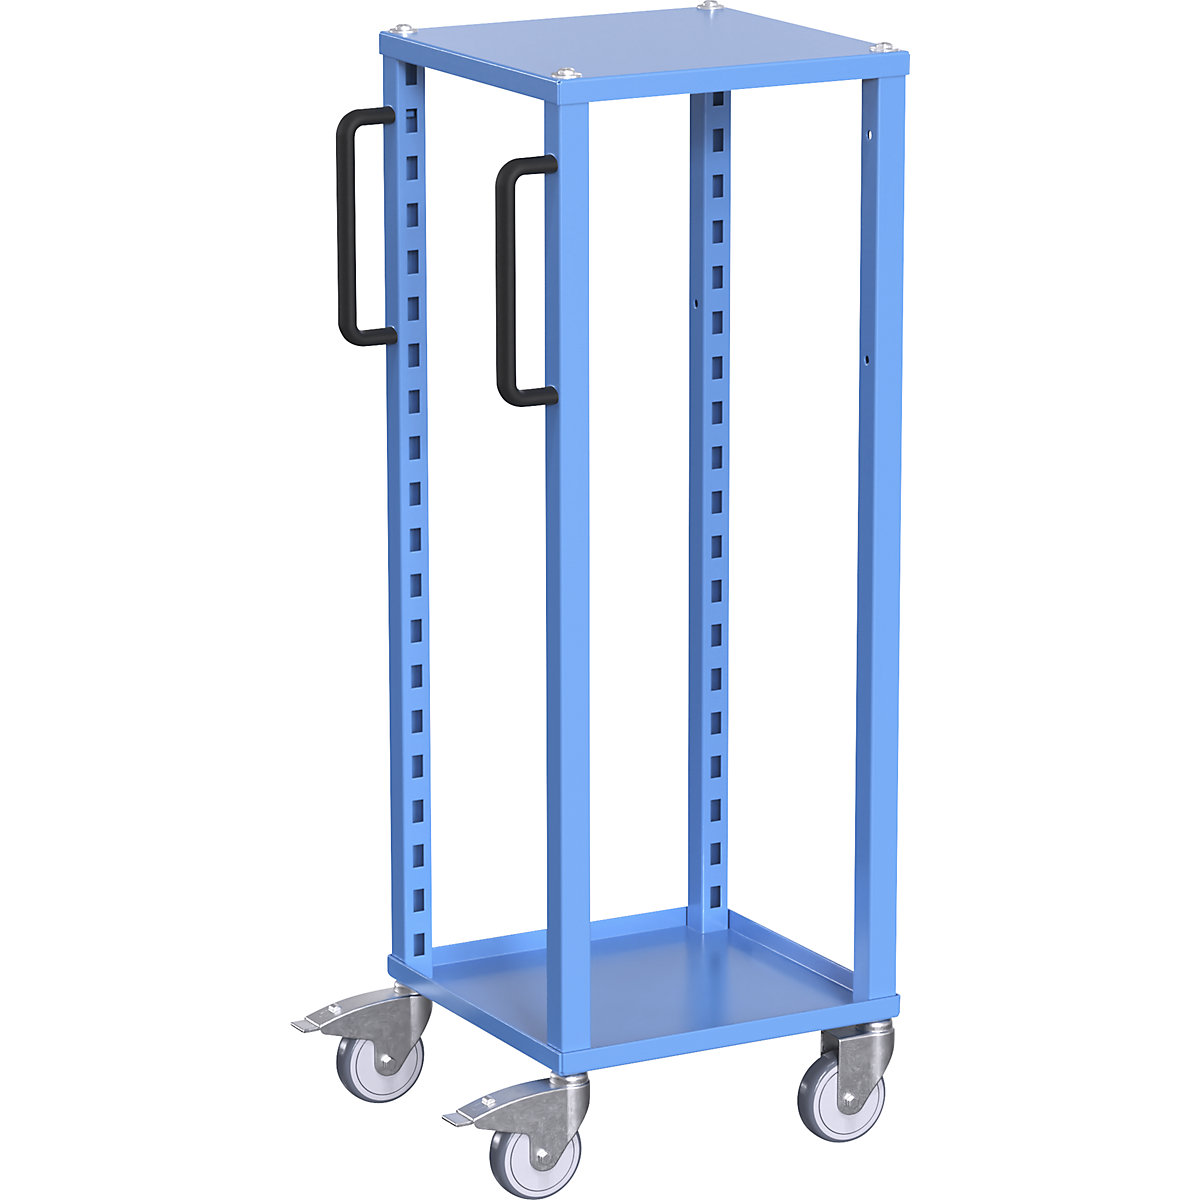 CustomLine Euro platform trolley – eurokraft pro, for containers LxW 400 x 300 mm, without boxes, blue-1